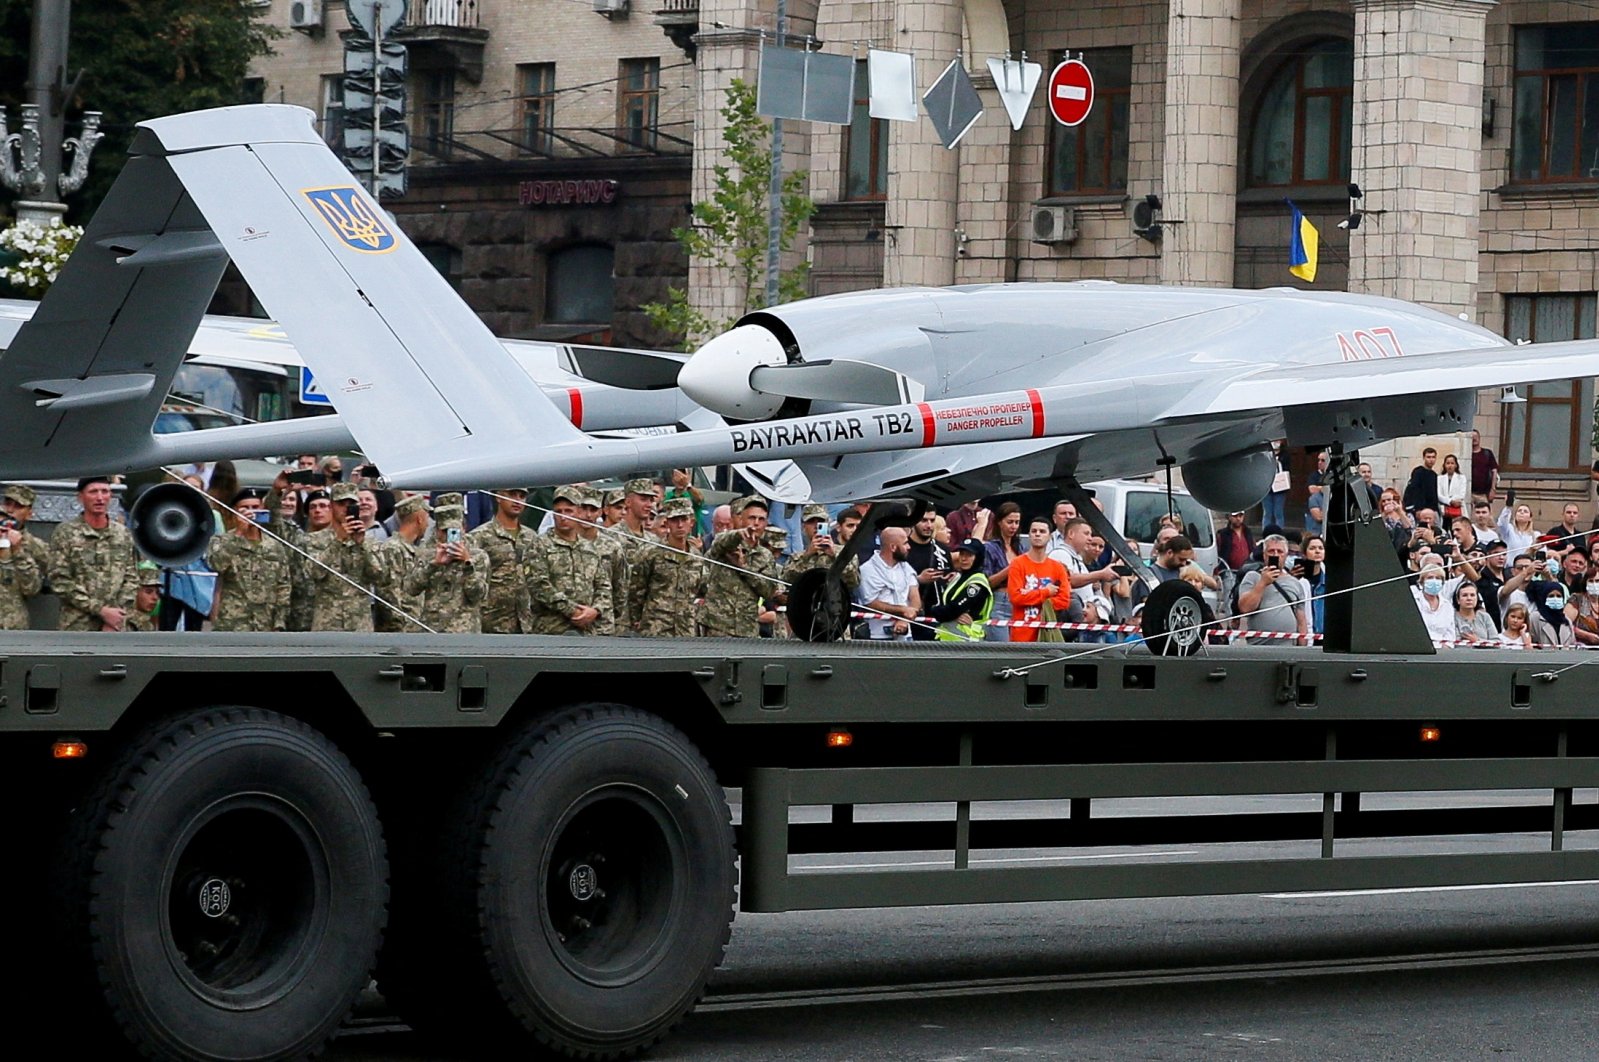 A Bayraktar drone seen during a rehearsal for the Independence Day military parade in central Kyiv, Ukraine, Aug. 18, 2021. (Reuters Photo)